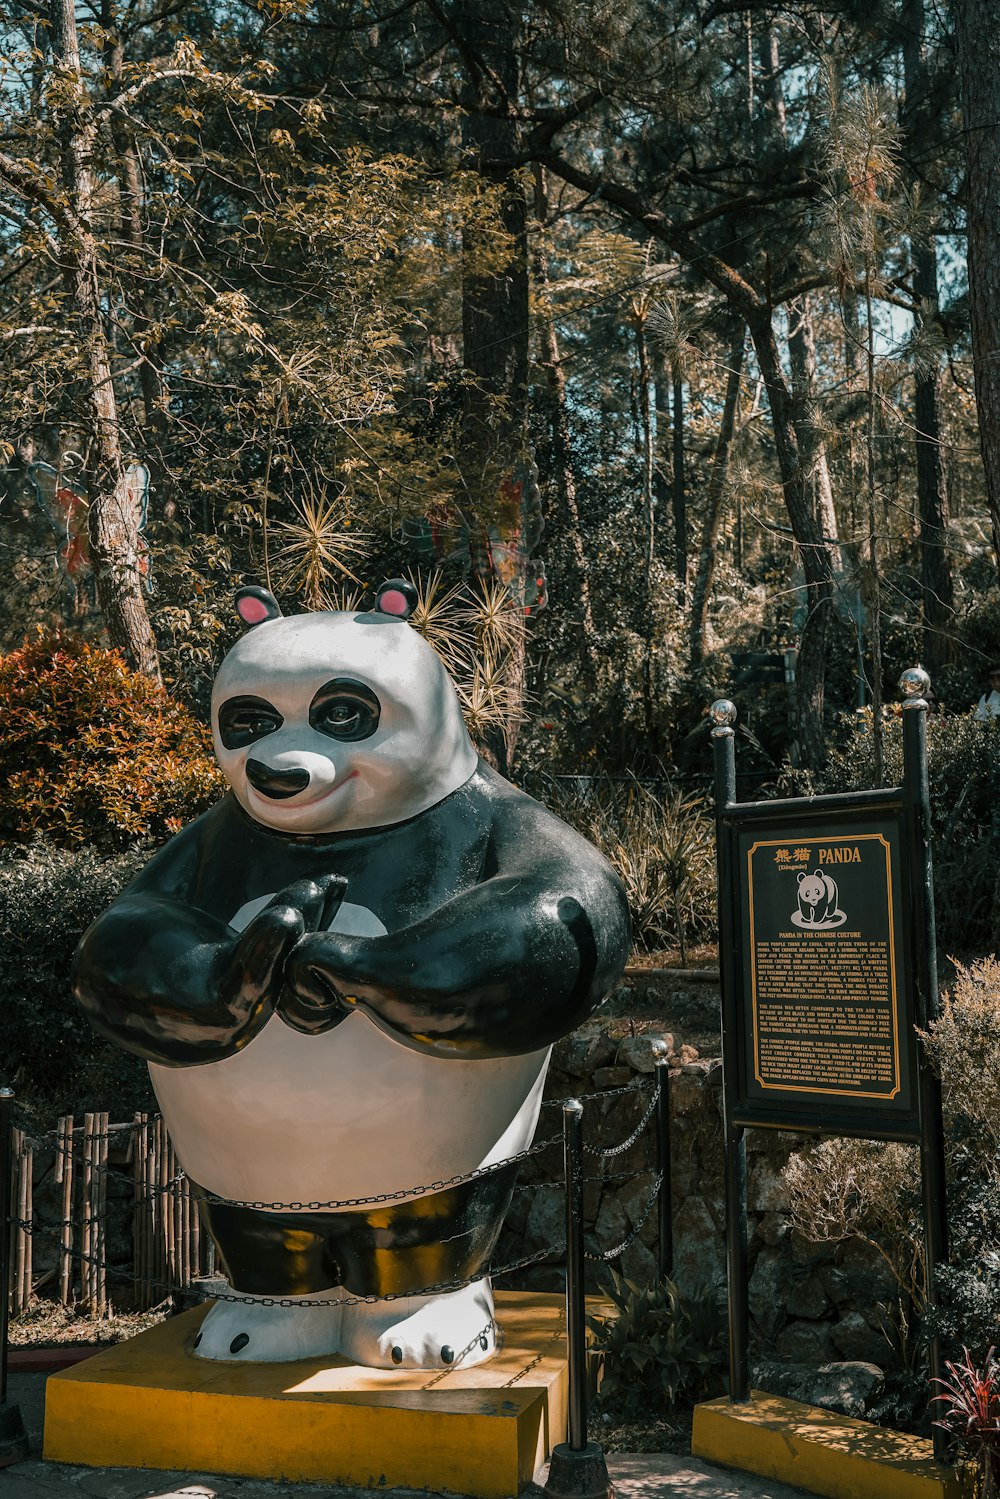 a large statue of a panda bear in a park